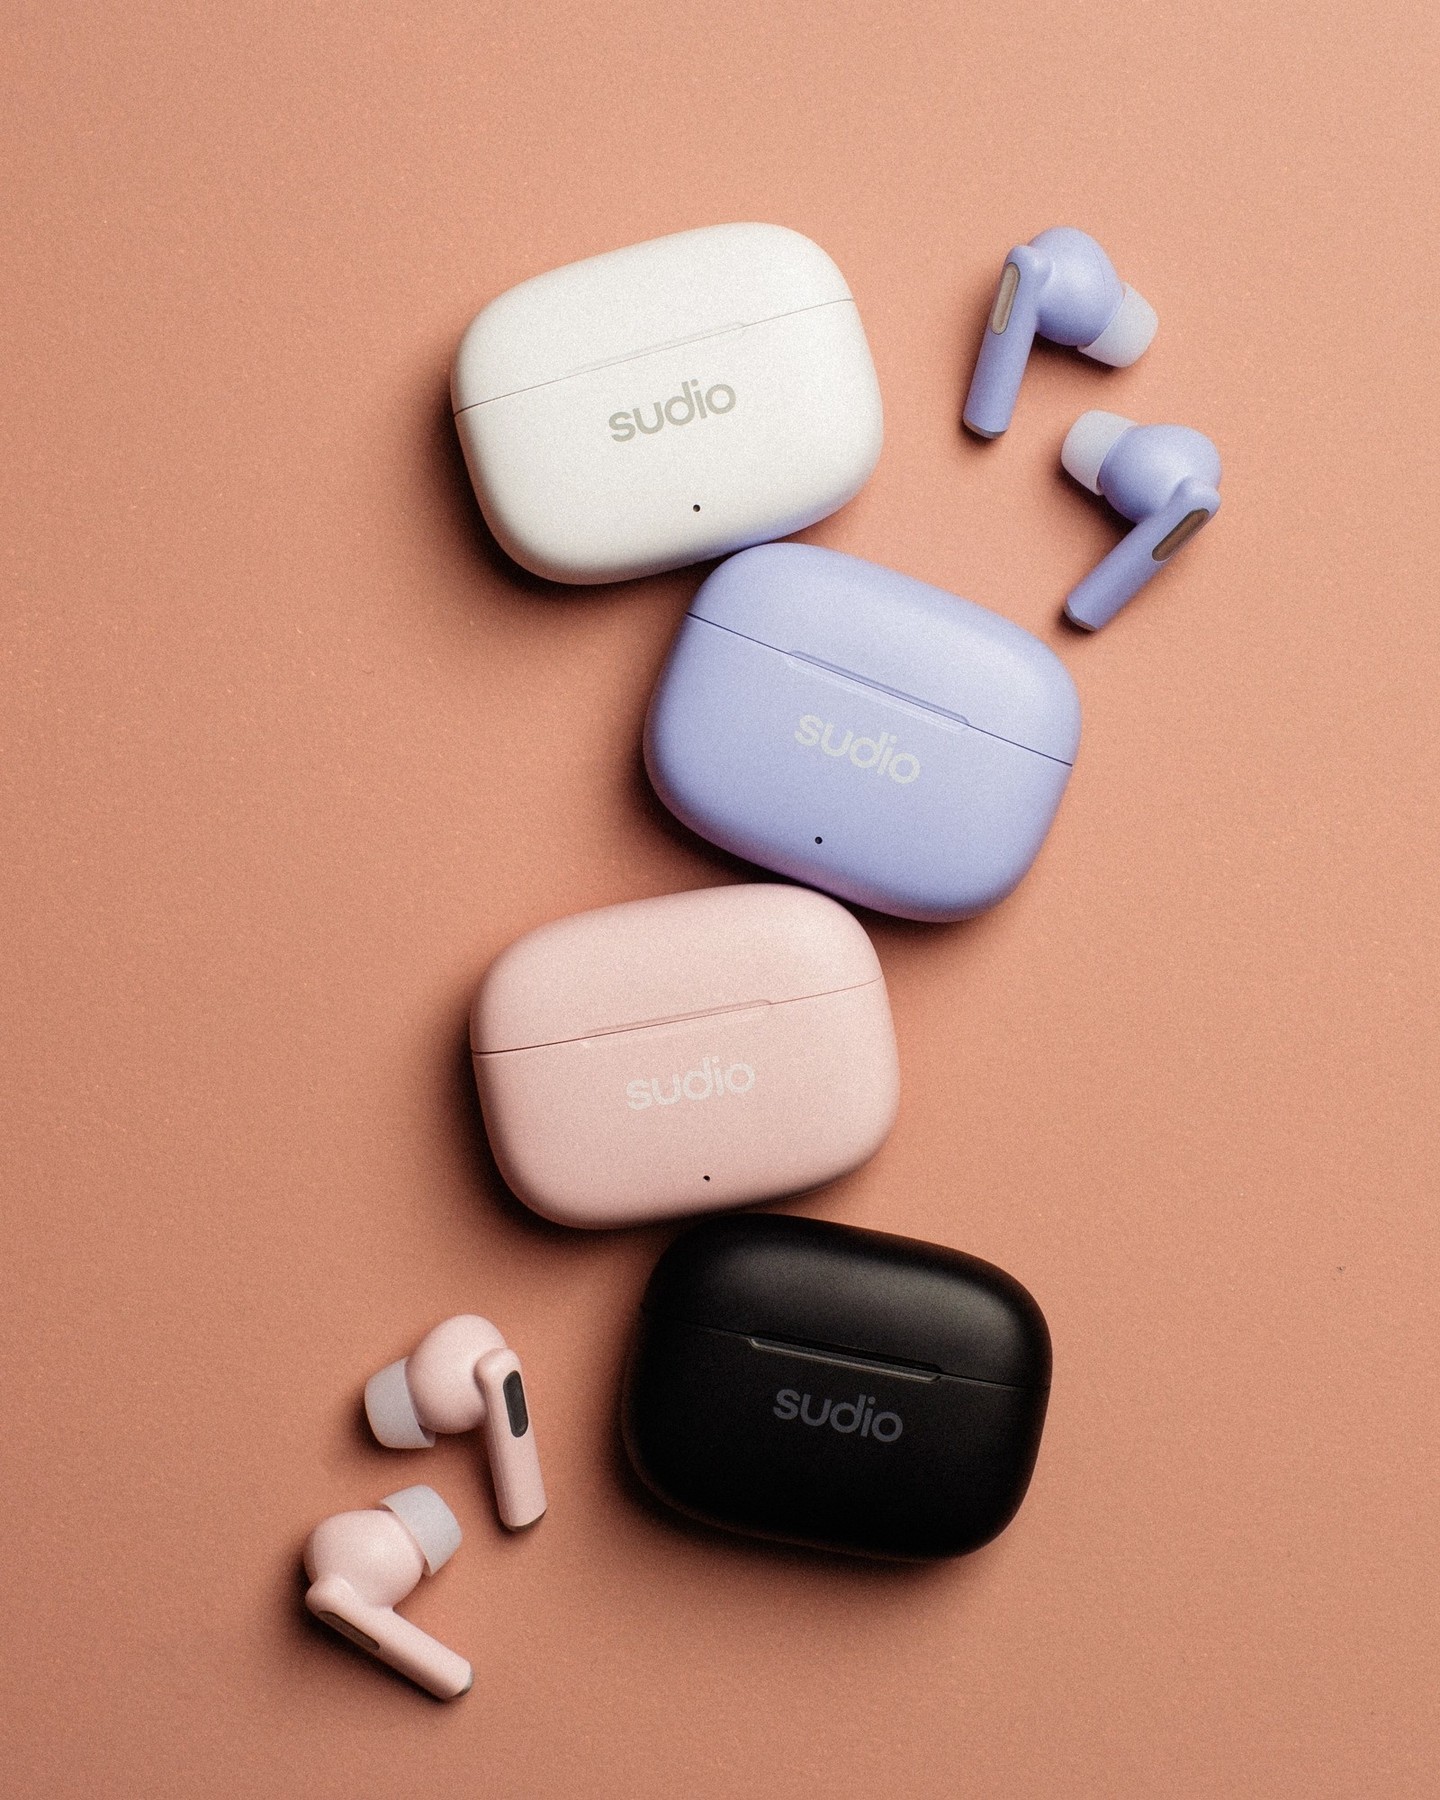 Add some color to your OOTD with these cute earbuds to make your day pop!⁠⁠#sudio #shapingsound #sprinkles⁠#A1ProWhite #A1ProPurple #A1ProPink #A1ProBlack #A1ProSand